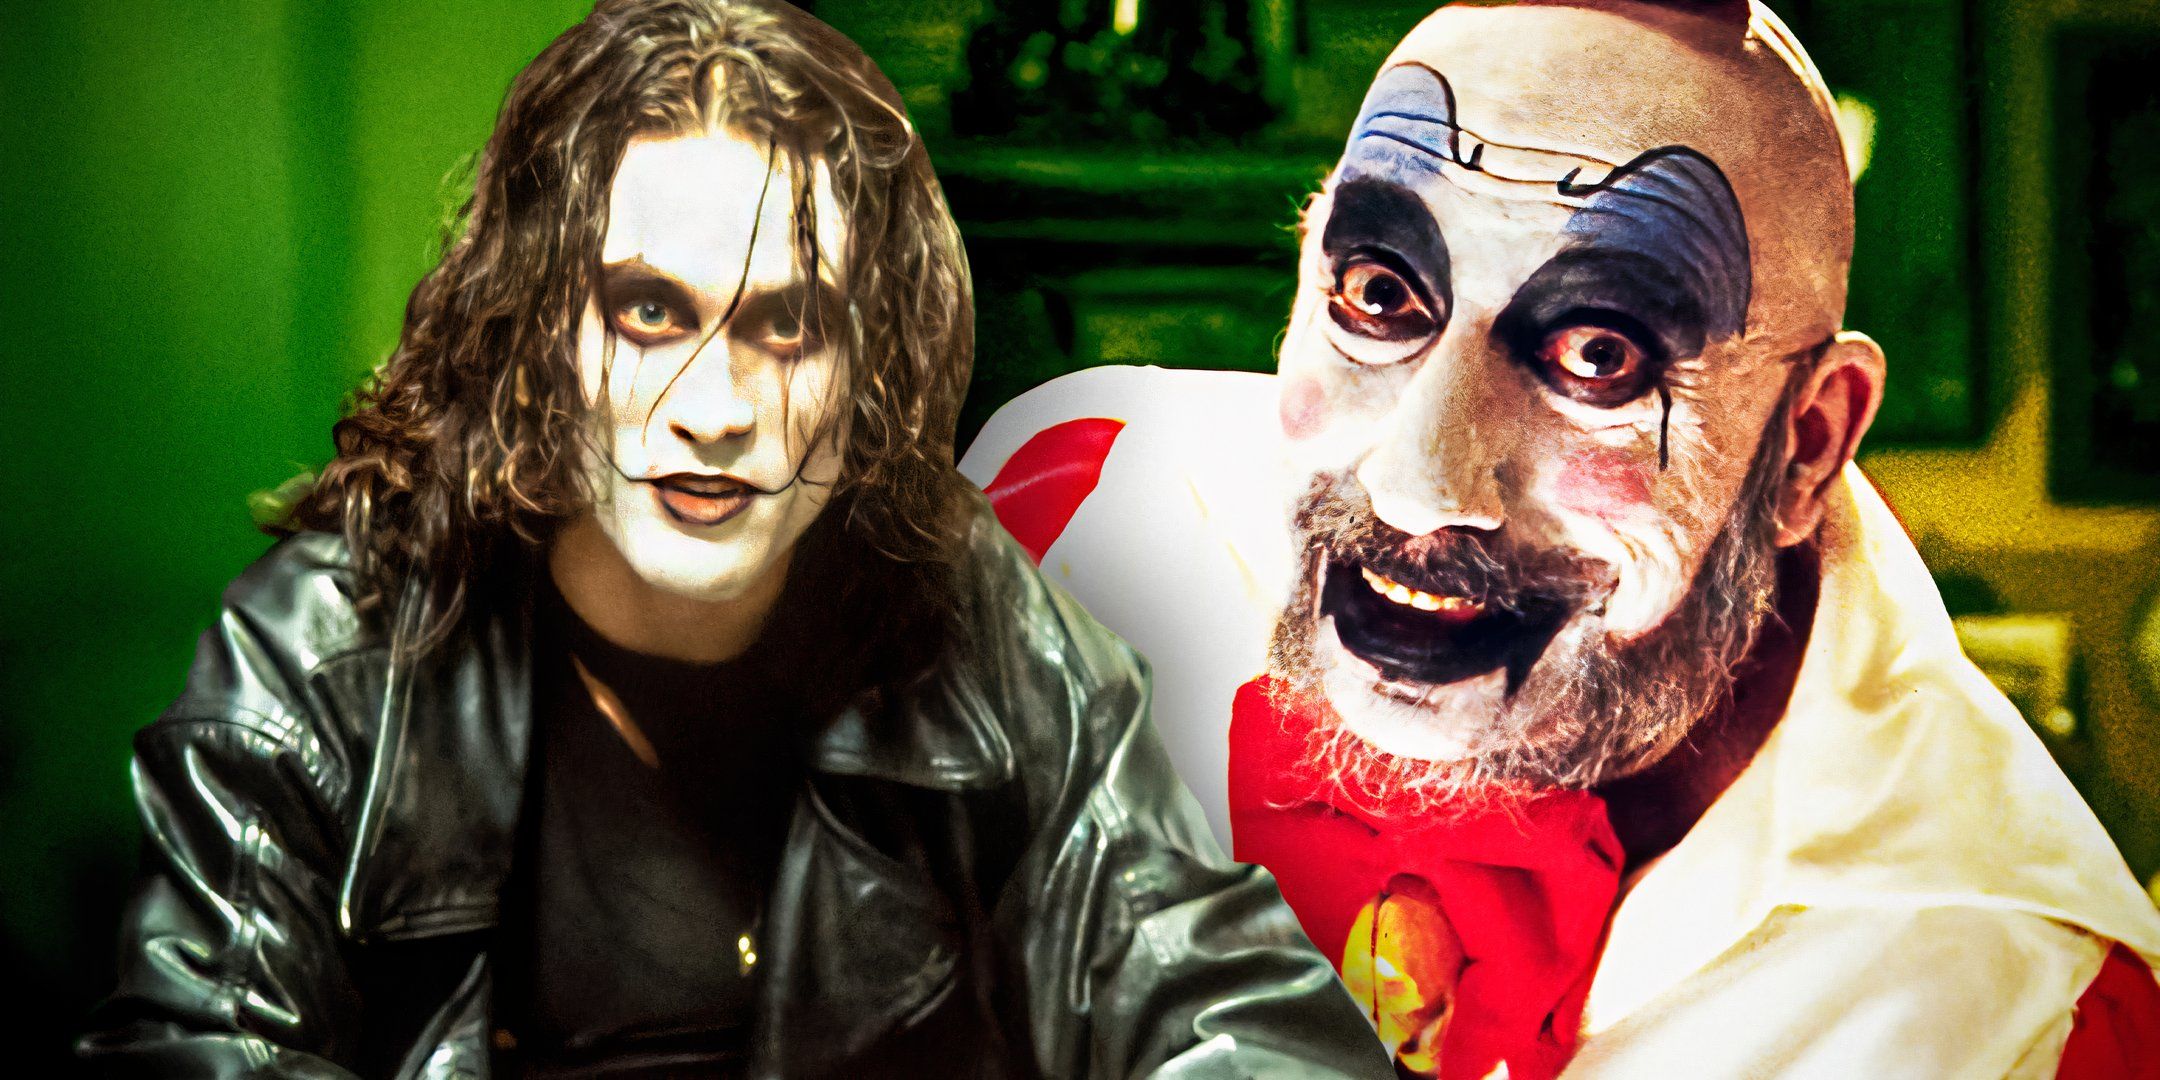 The Crow Brandon Lee as Eric Draven next to Sid Haig as Captain Spaulding in House of 1000 Corpses